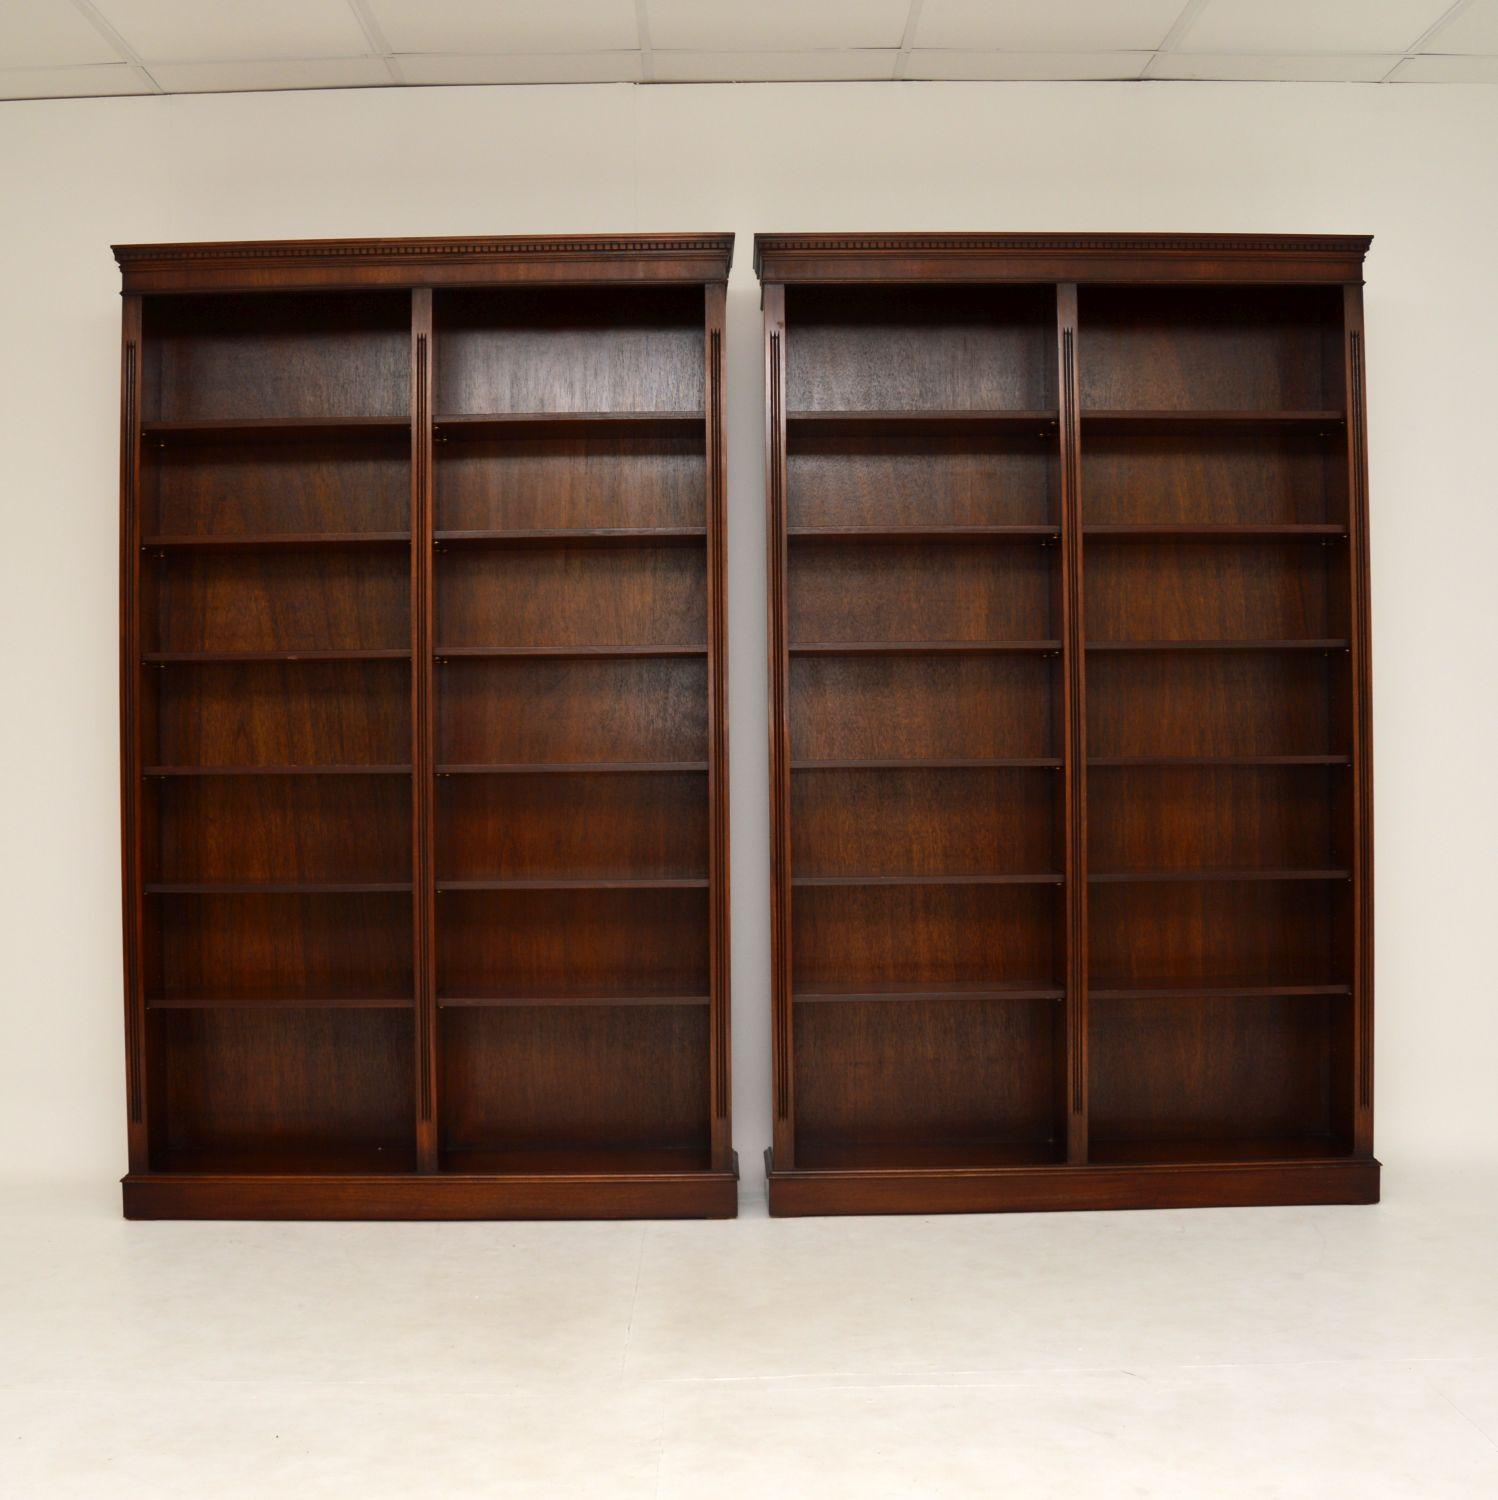 A smart and useful pair of large open bookcases in mahogany. These are in the antique Georgian style, they date from around the 1960’s period.

They are of fine quality, are very well constructed and are in excellent condition, with only some